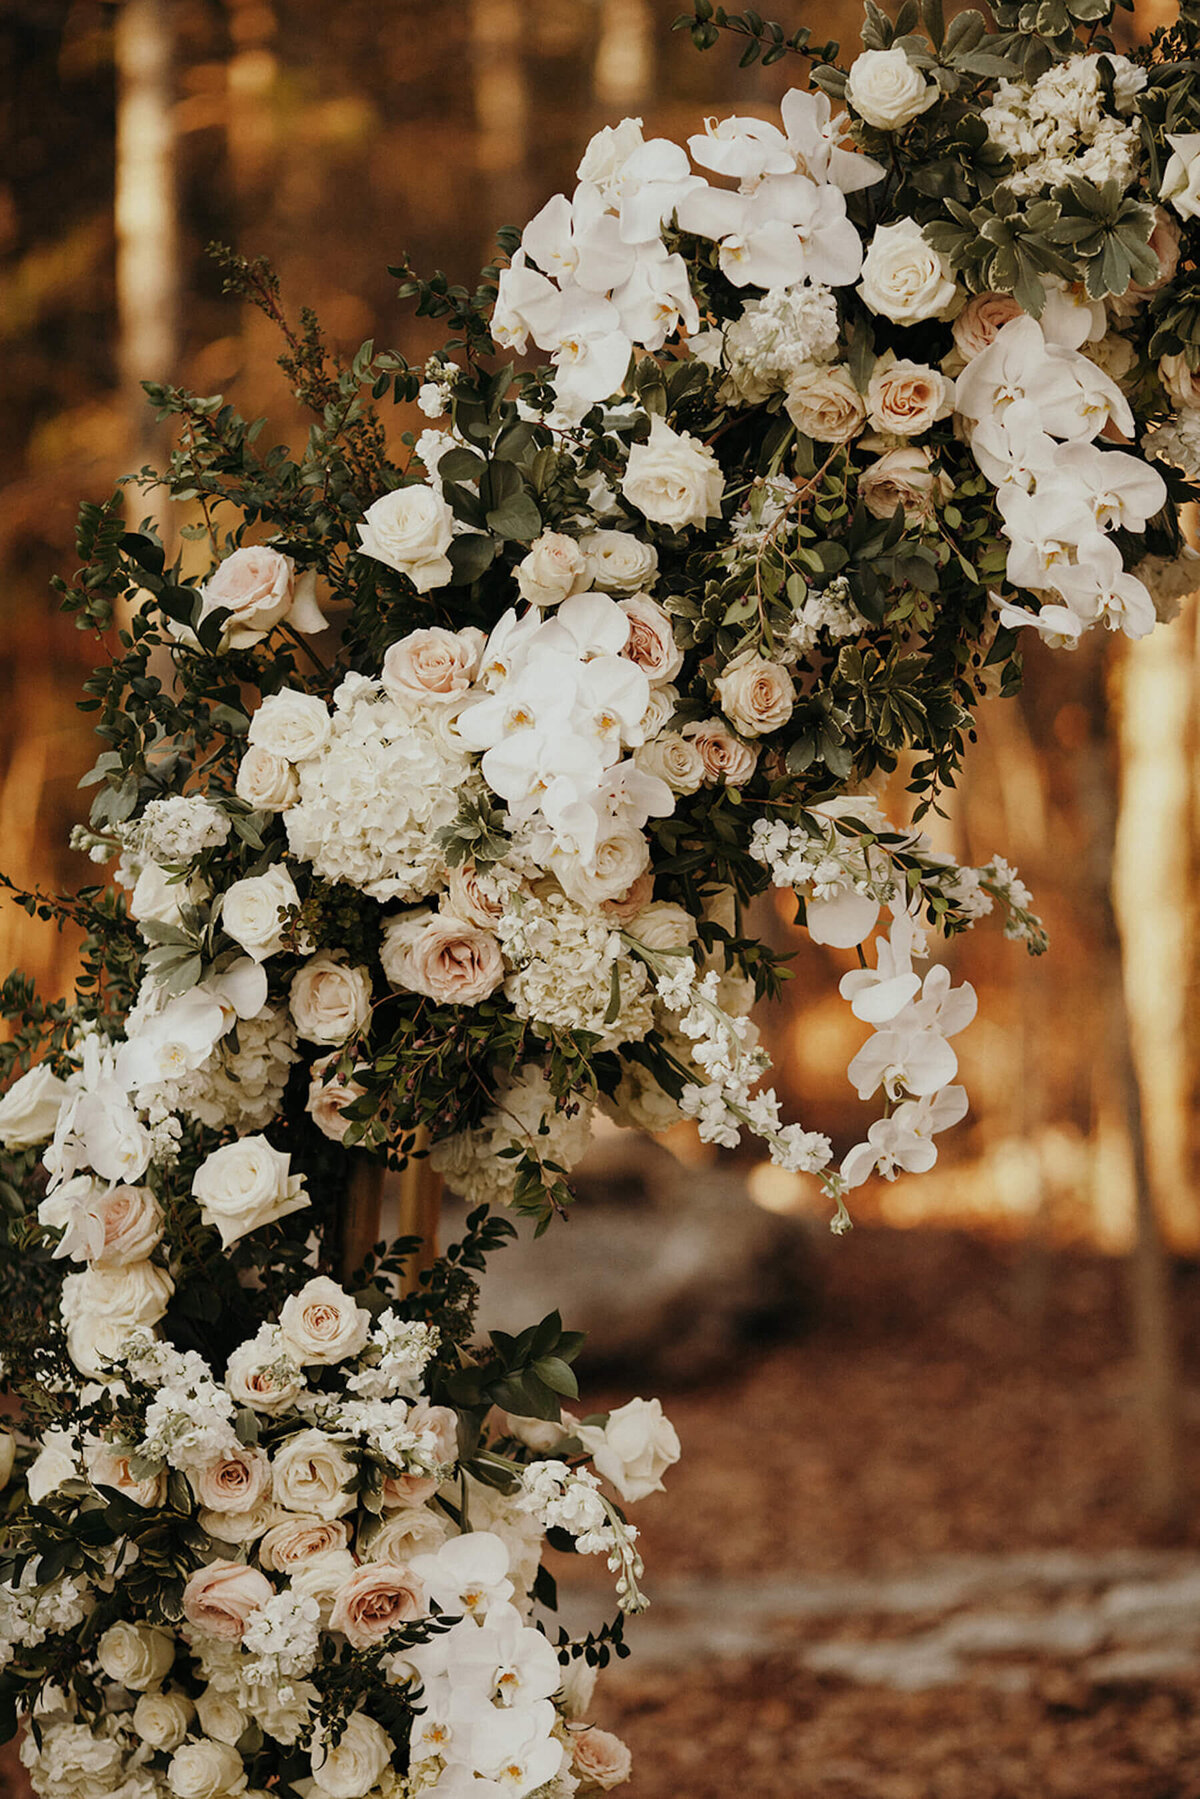 white, champagne, blush flowers and greenery on hay bale ceremony altar